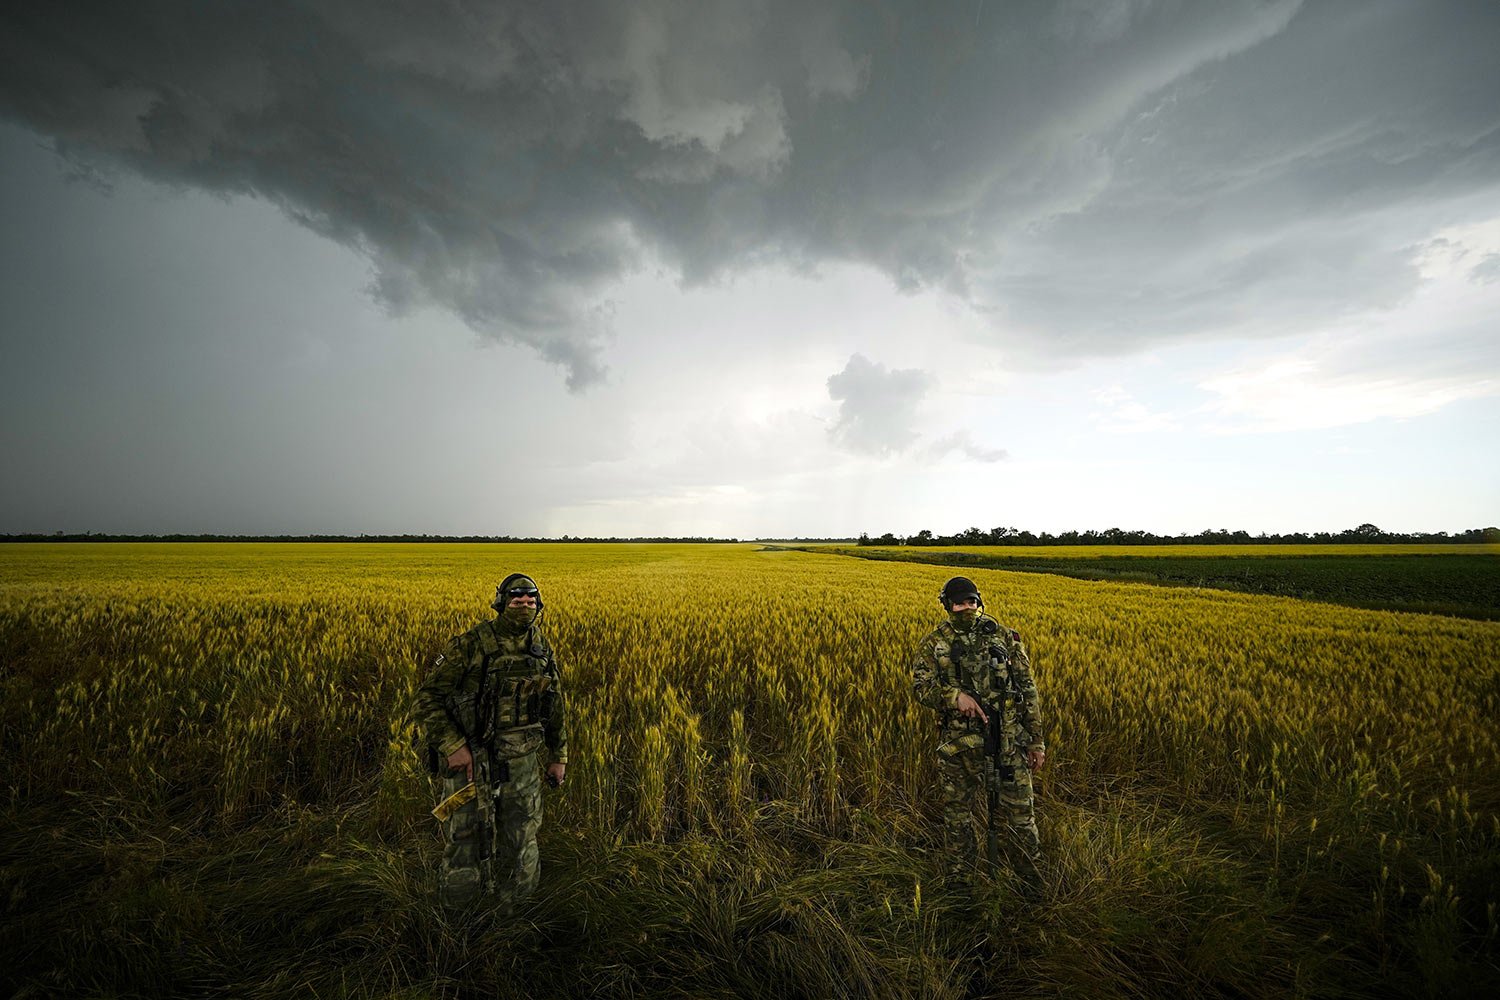  Russian soldiers guard an area next to a field of wheat as foreign journalists work in the Zaporizhzhia region in an area under Russian military control, southeastern Ukraine, Tuesday, June 14, 2022. The Zaporizhzhia region has been under control of